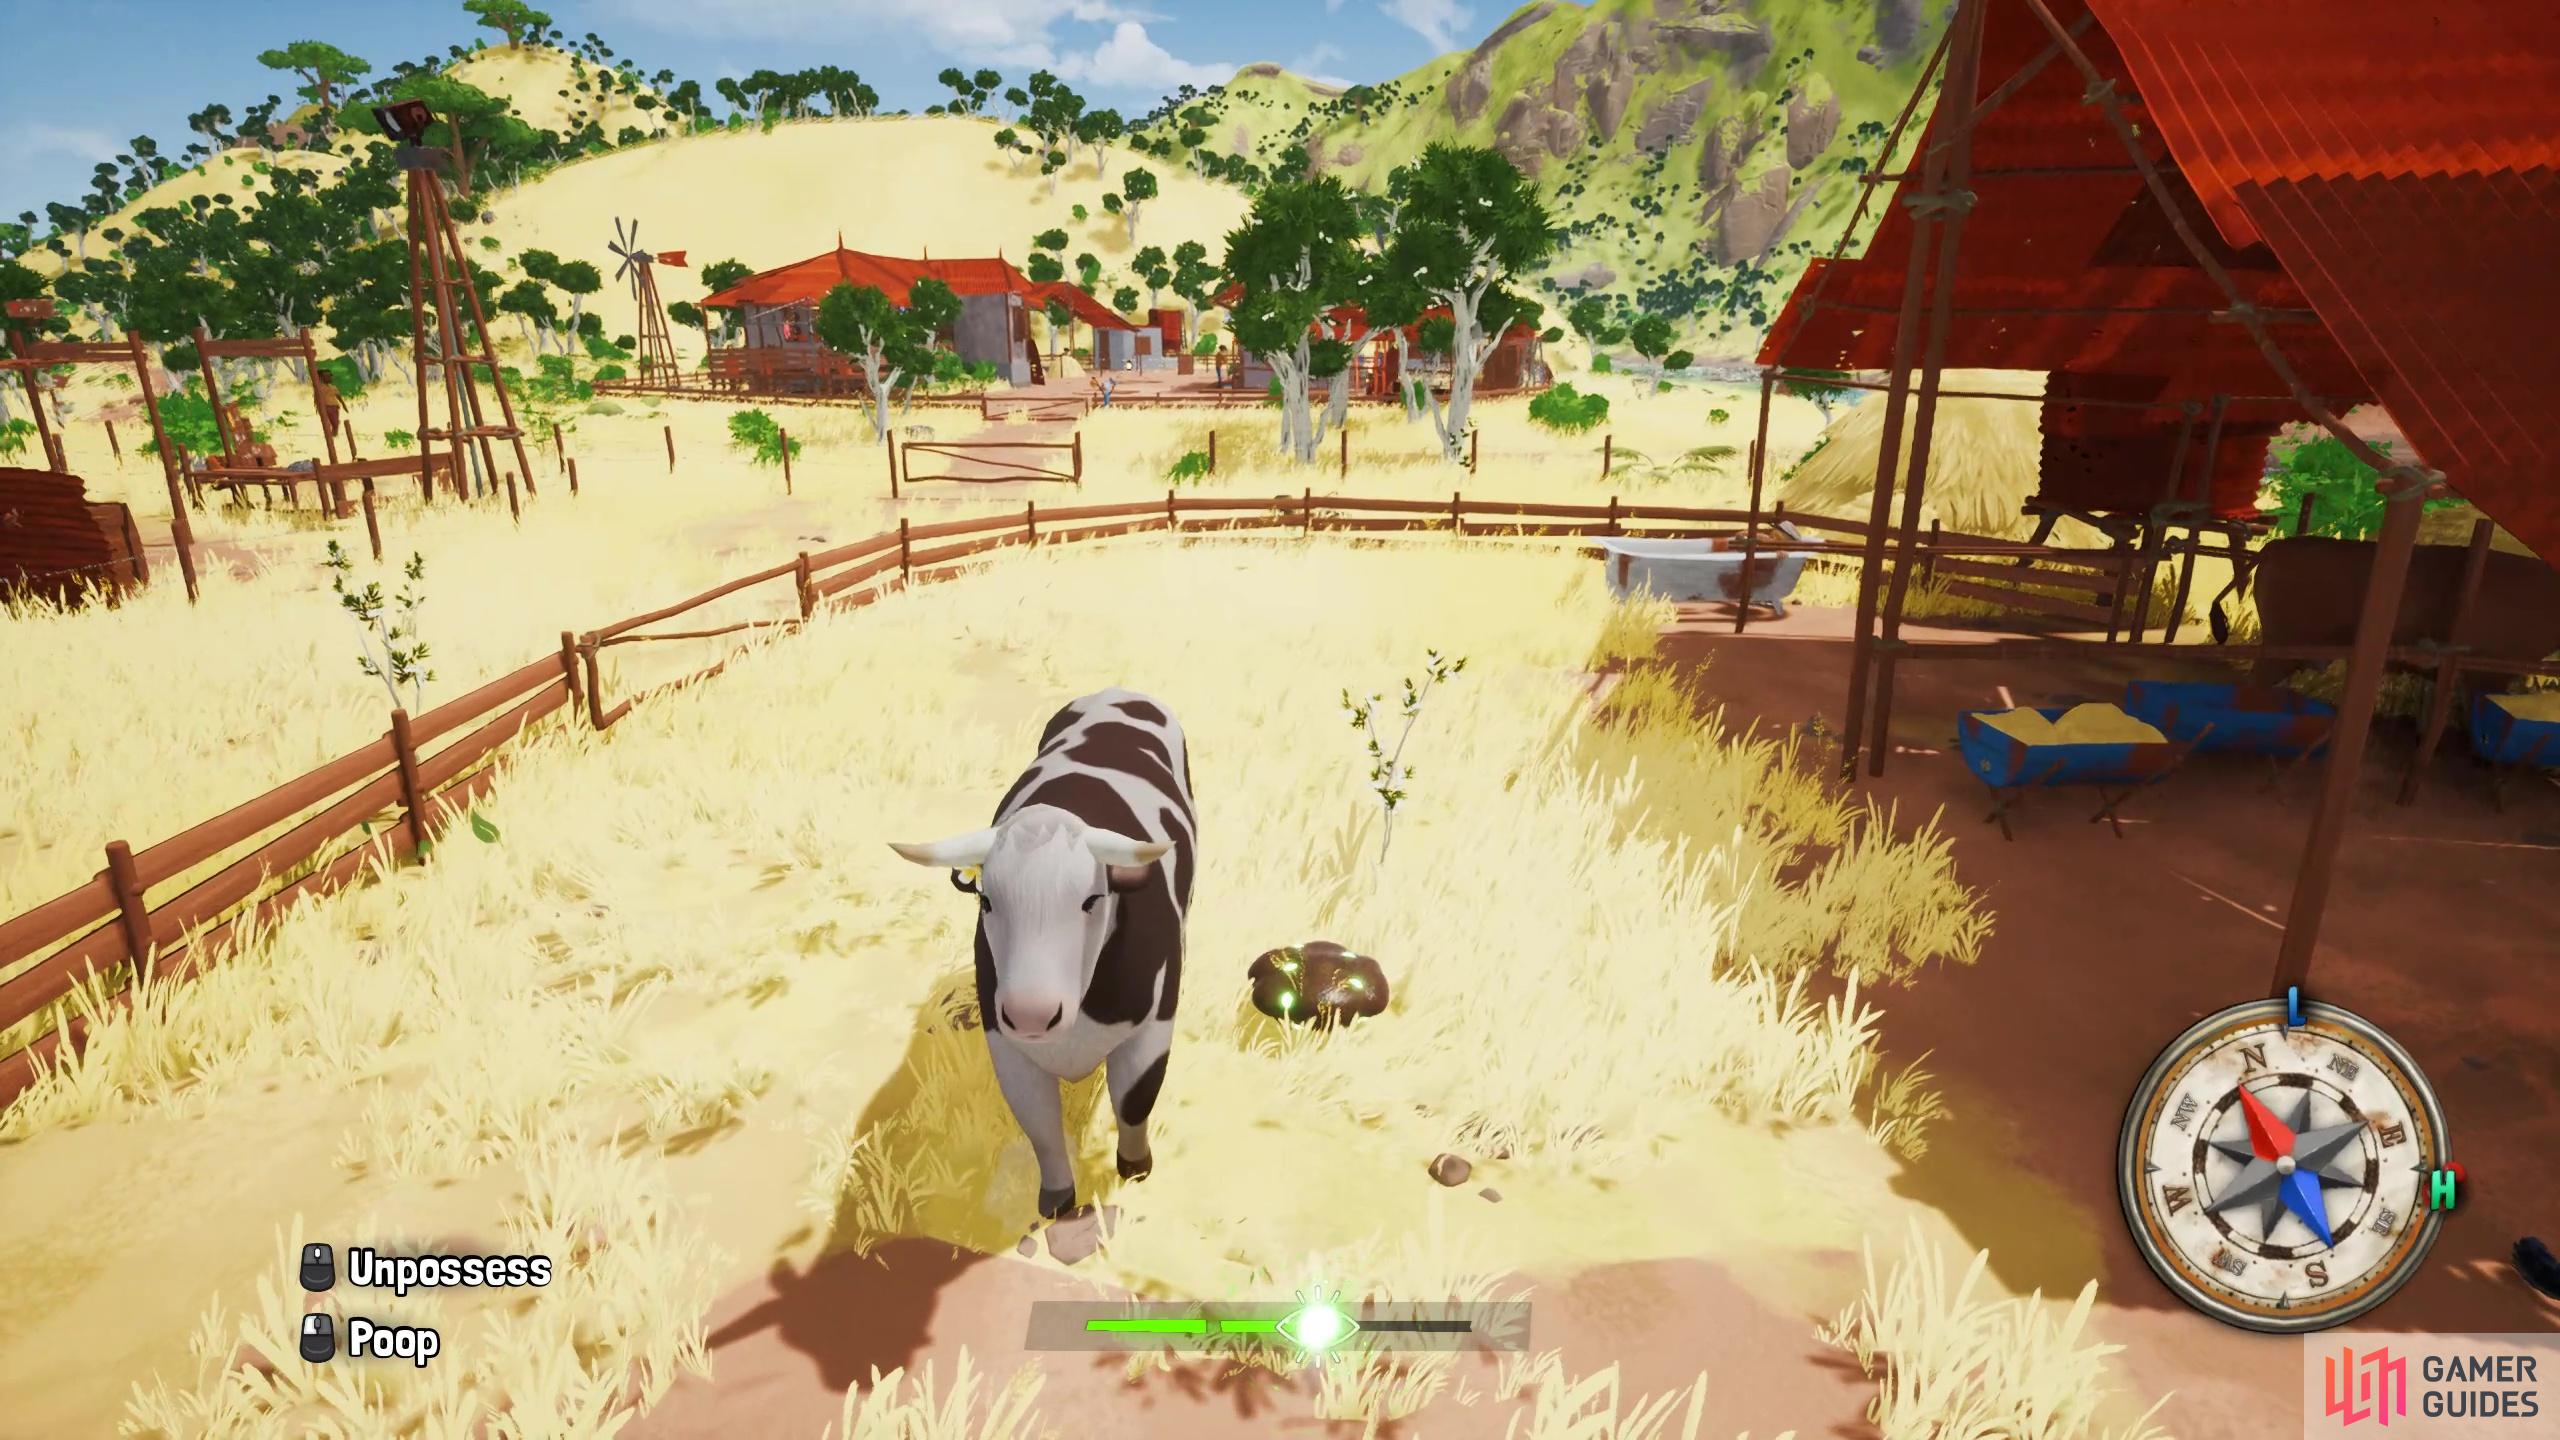 Soul jump into a cow to make some explosive poops!